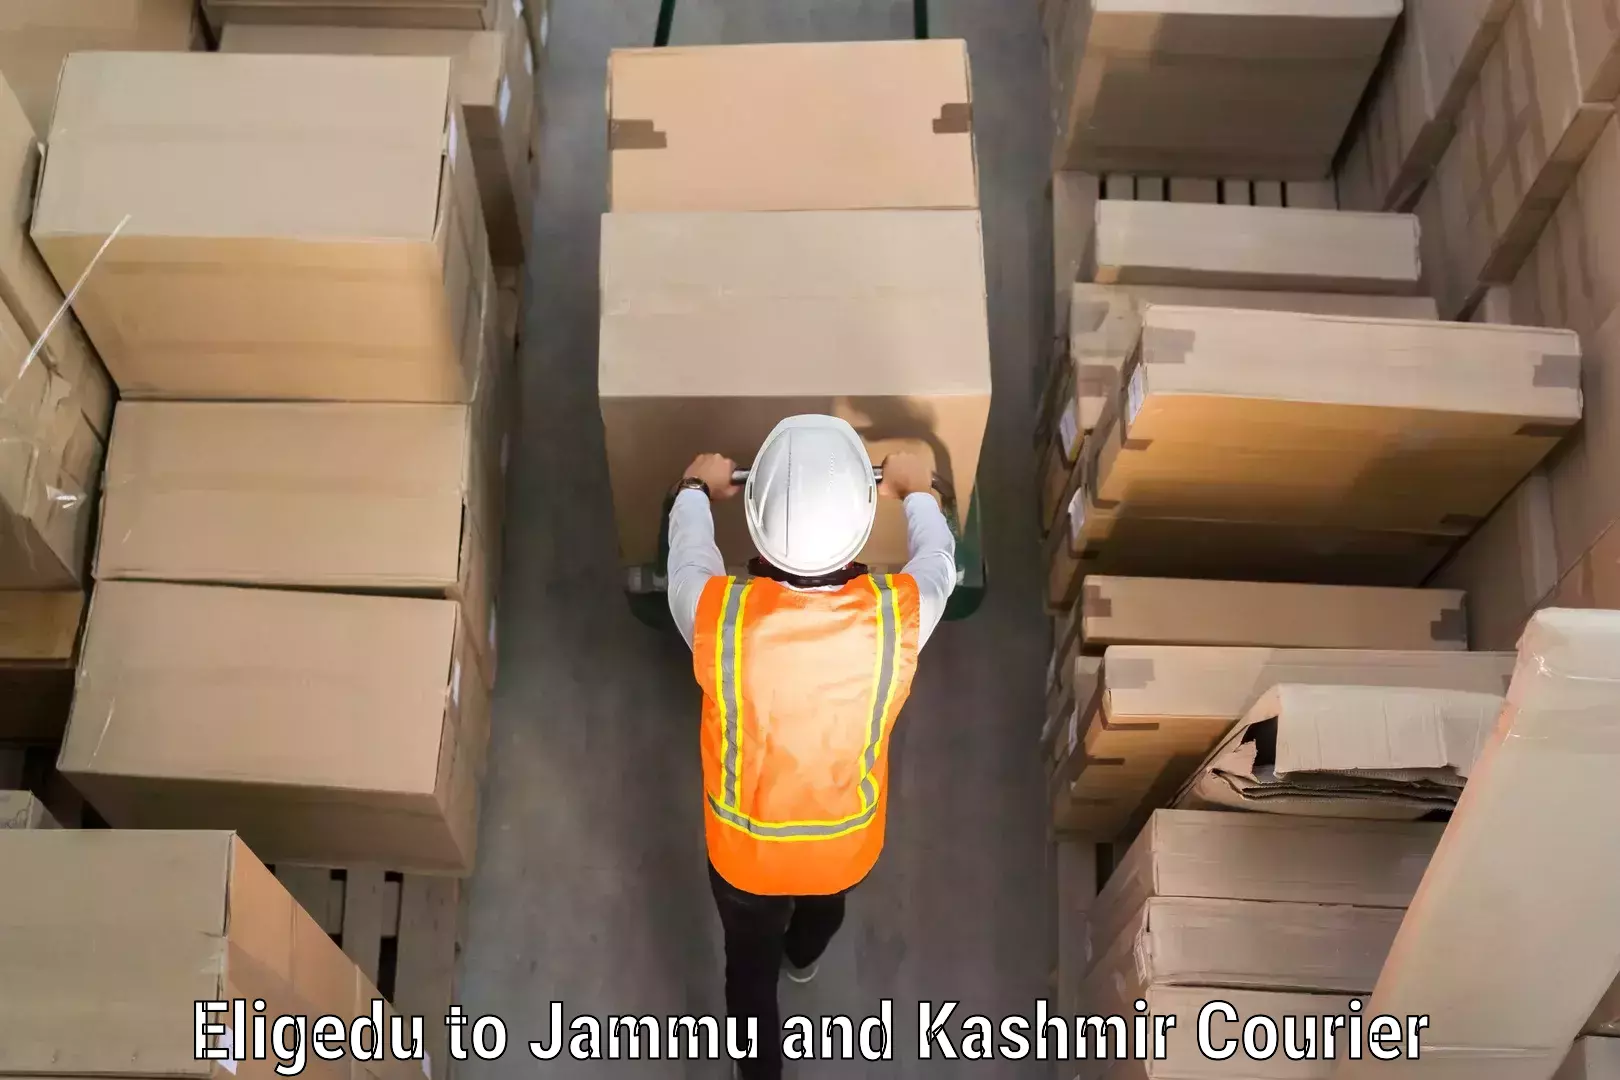 Baggage delivery solutions Eligedu to Jammu and Kashmir